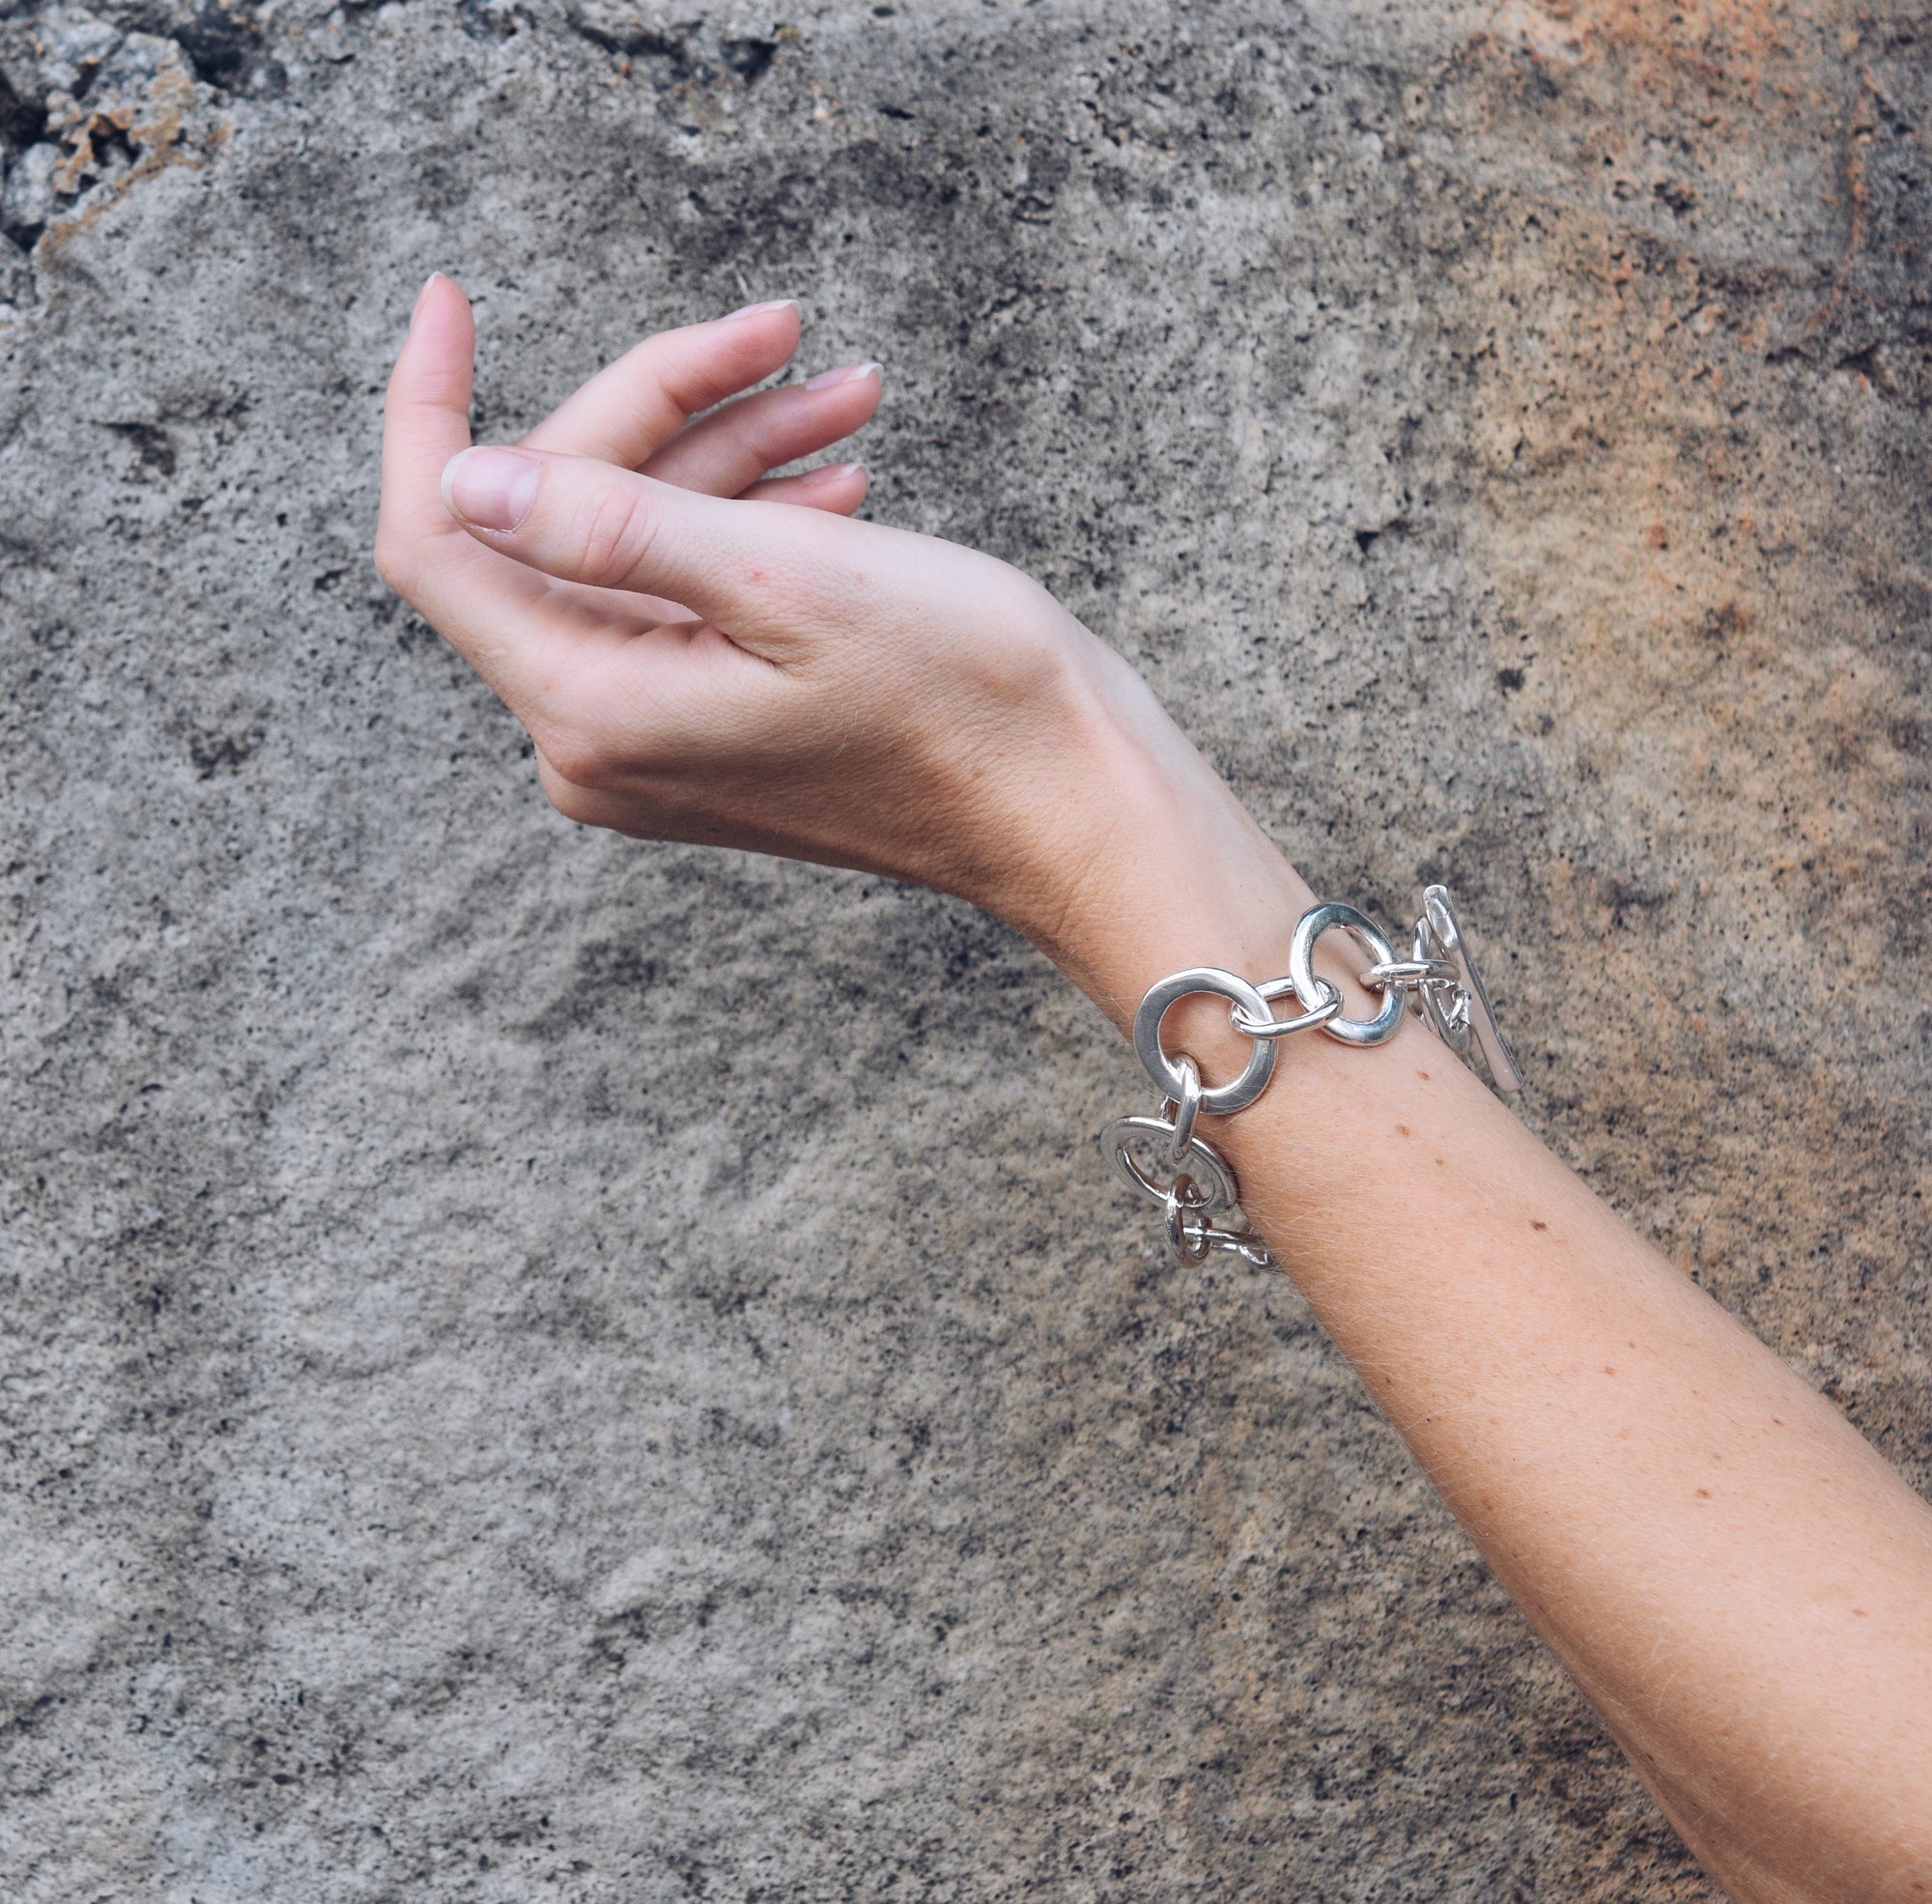 A model wearing the Caroline bracelet with a concrete background.